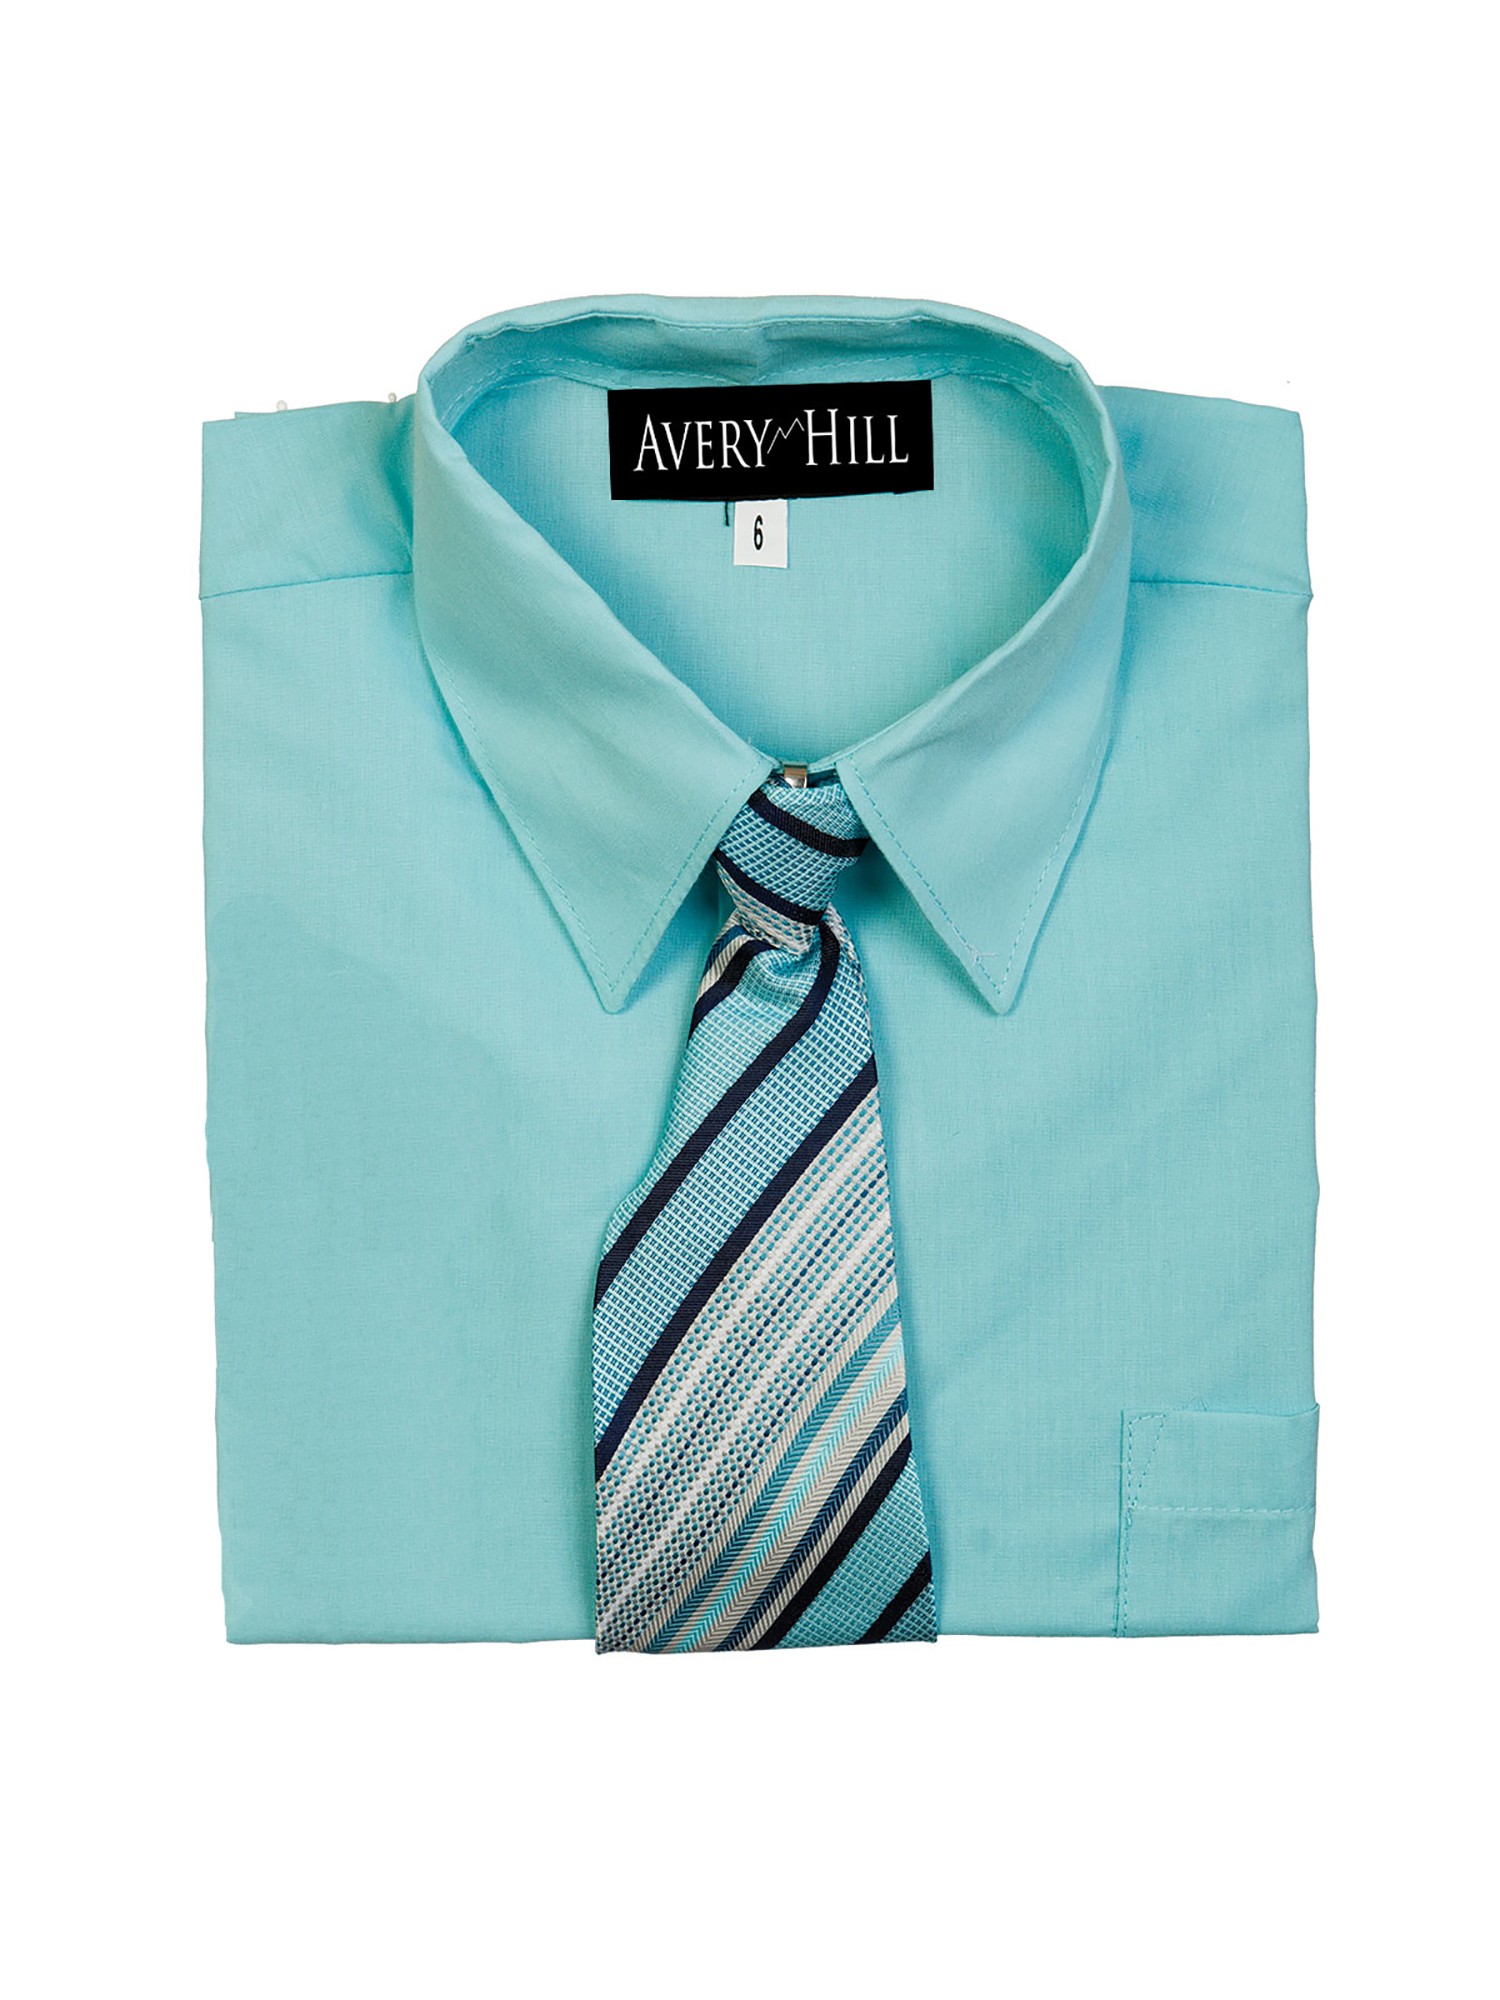 Avery Hill Boys Short Sleeve Dress Shirt With Windsor Tie - image 1 of 1